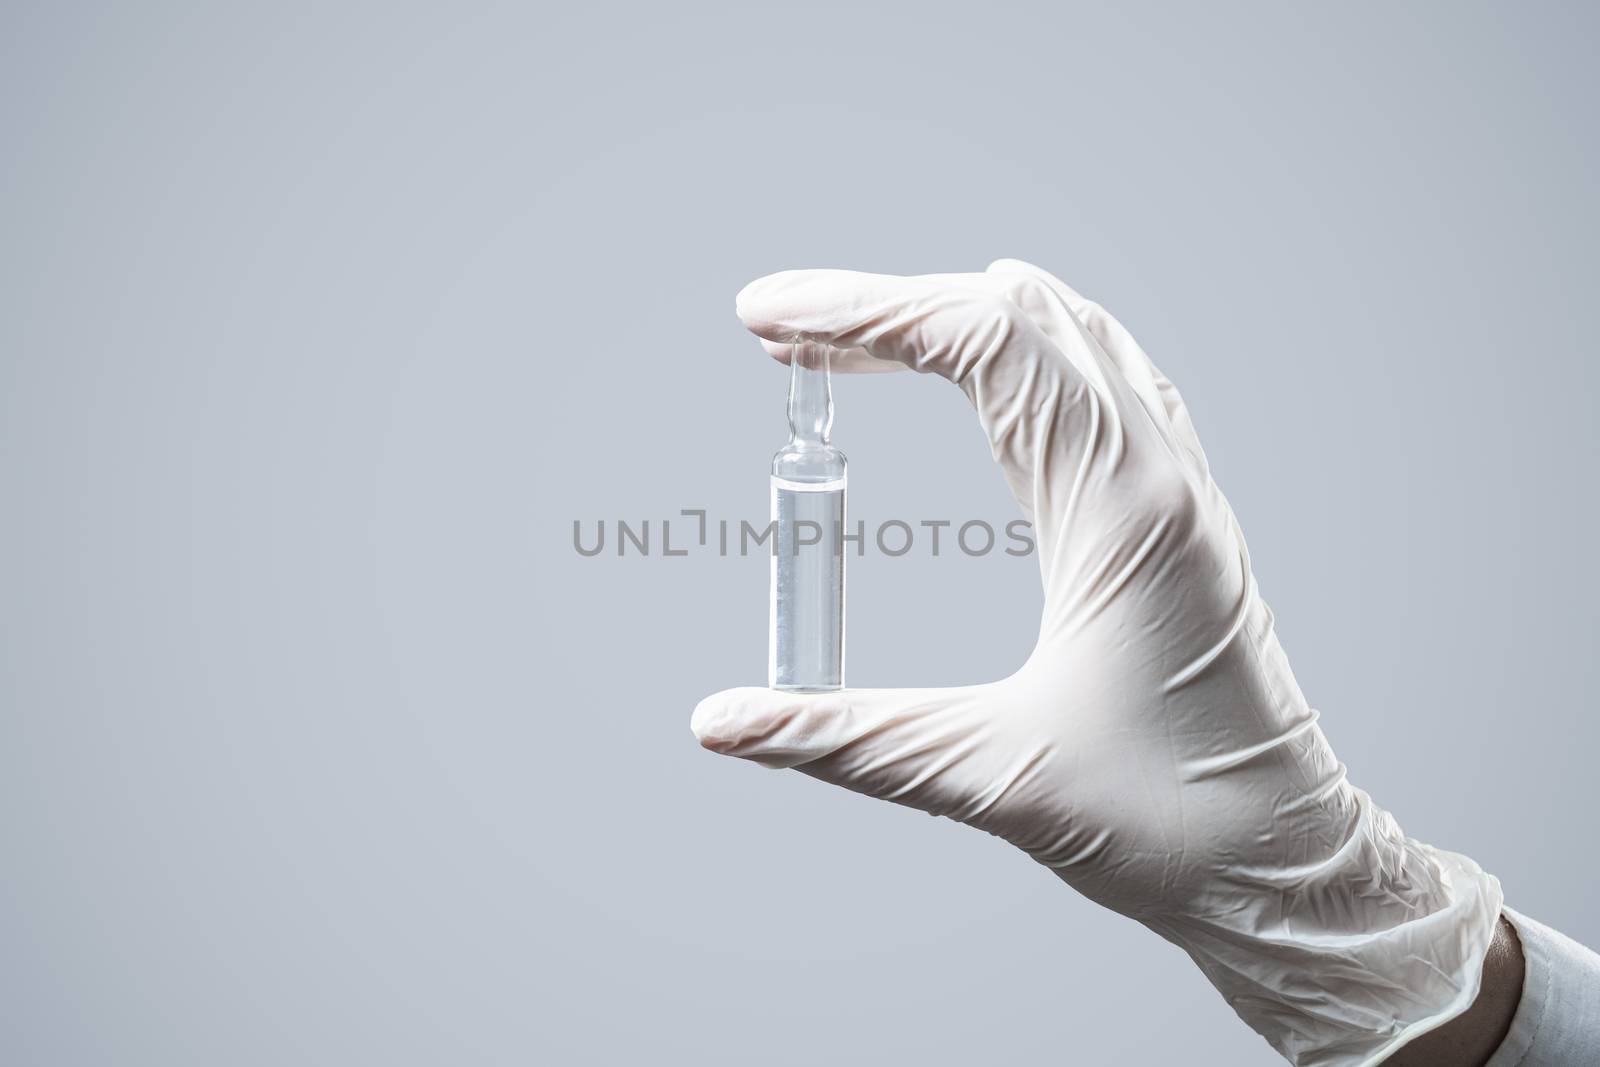 Ampouled solution in a hand wearing glove. by photoboyko